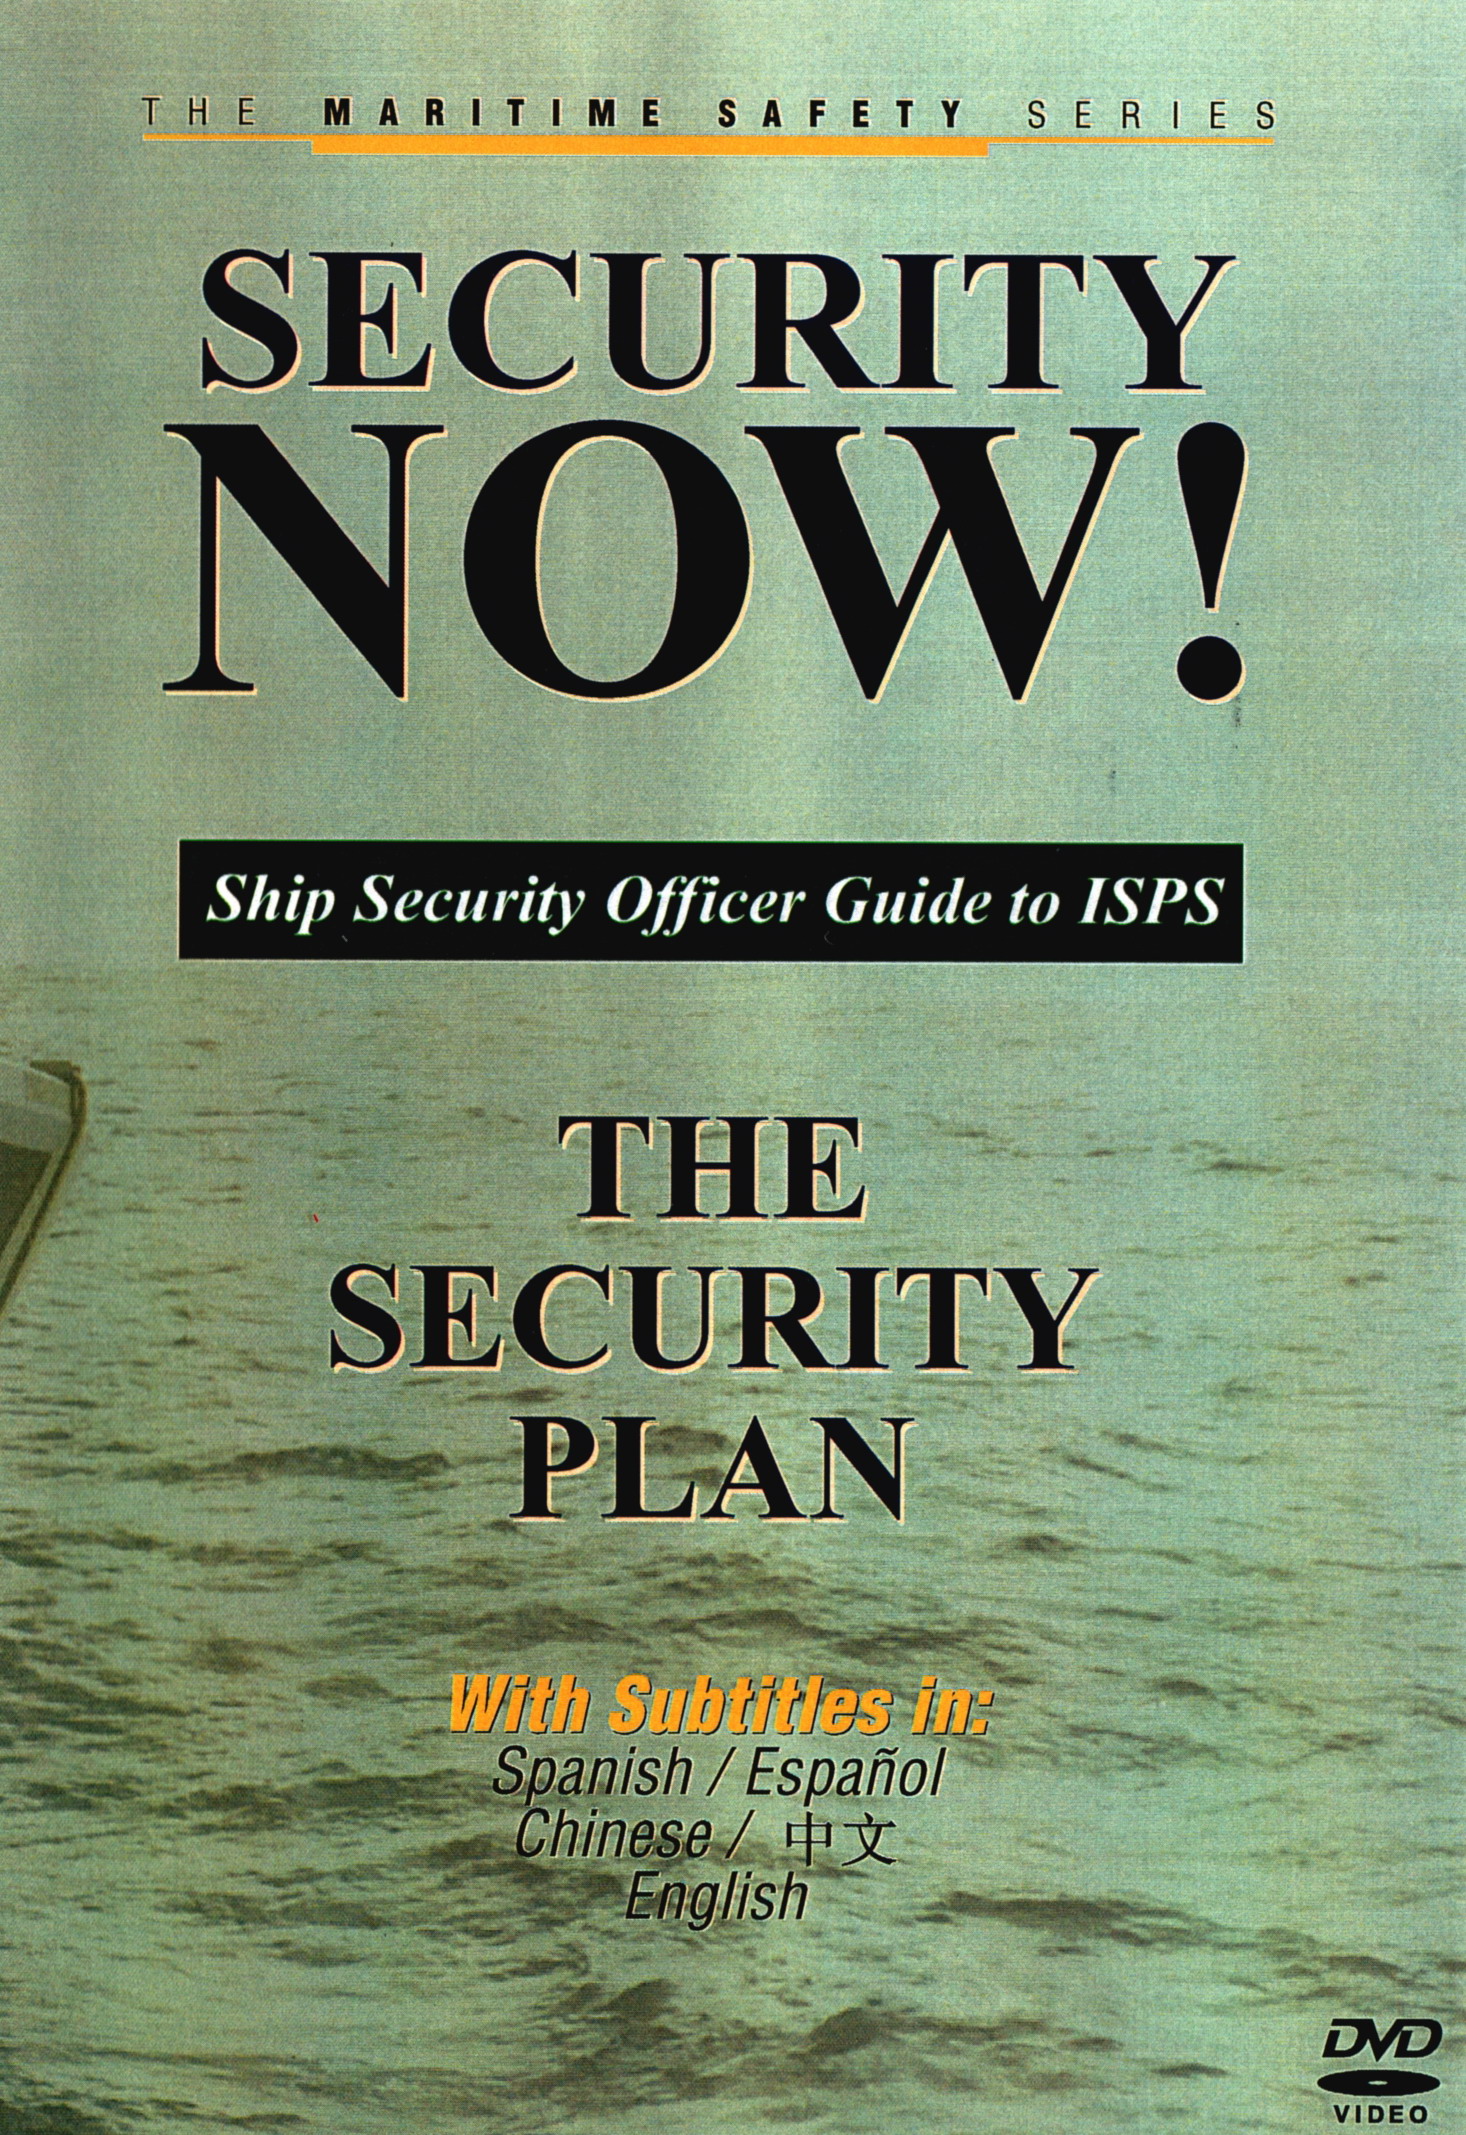 Security NOW! The Security Plan